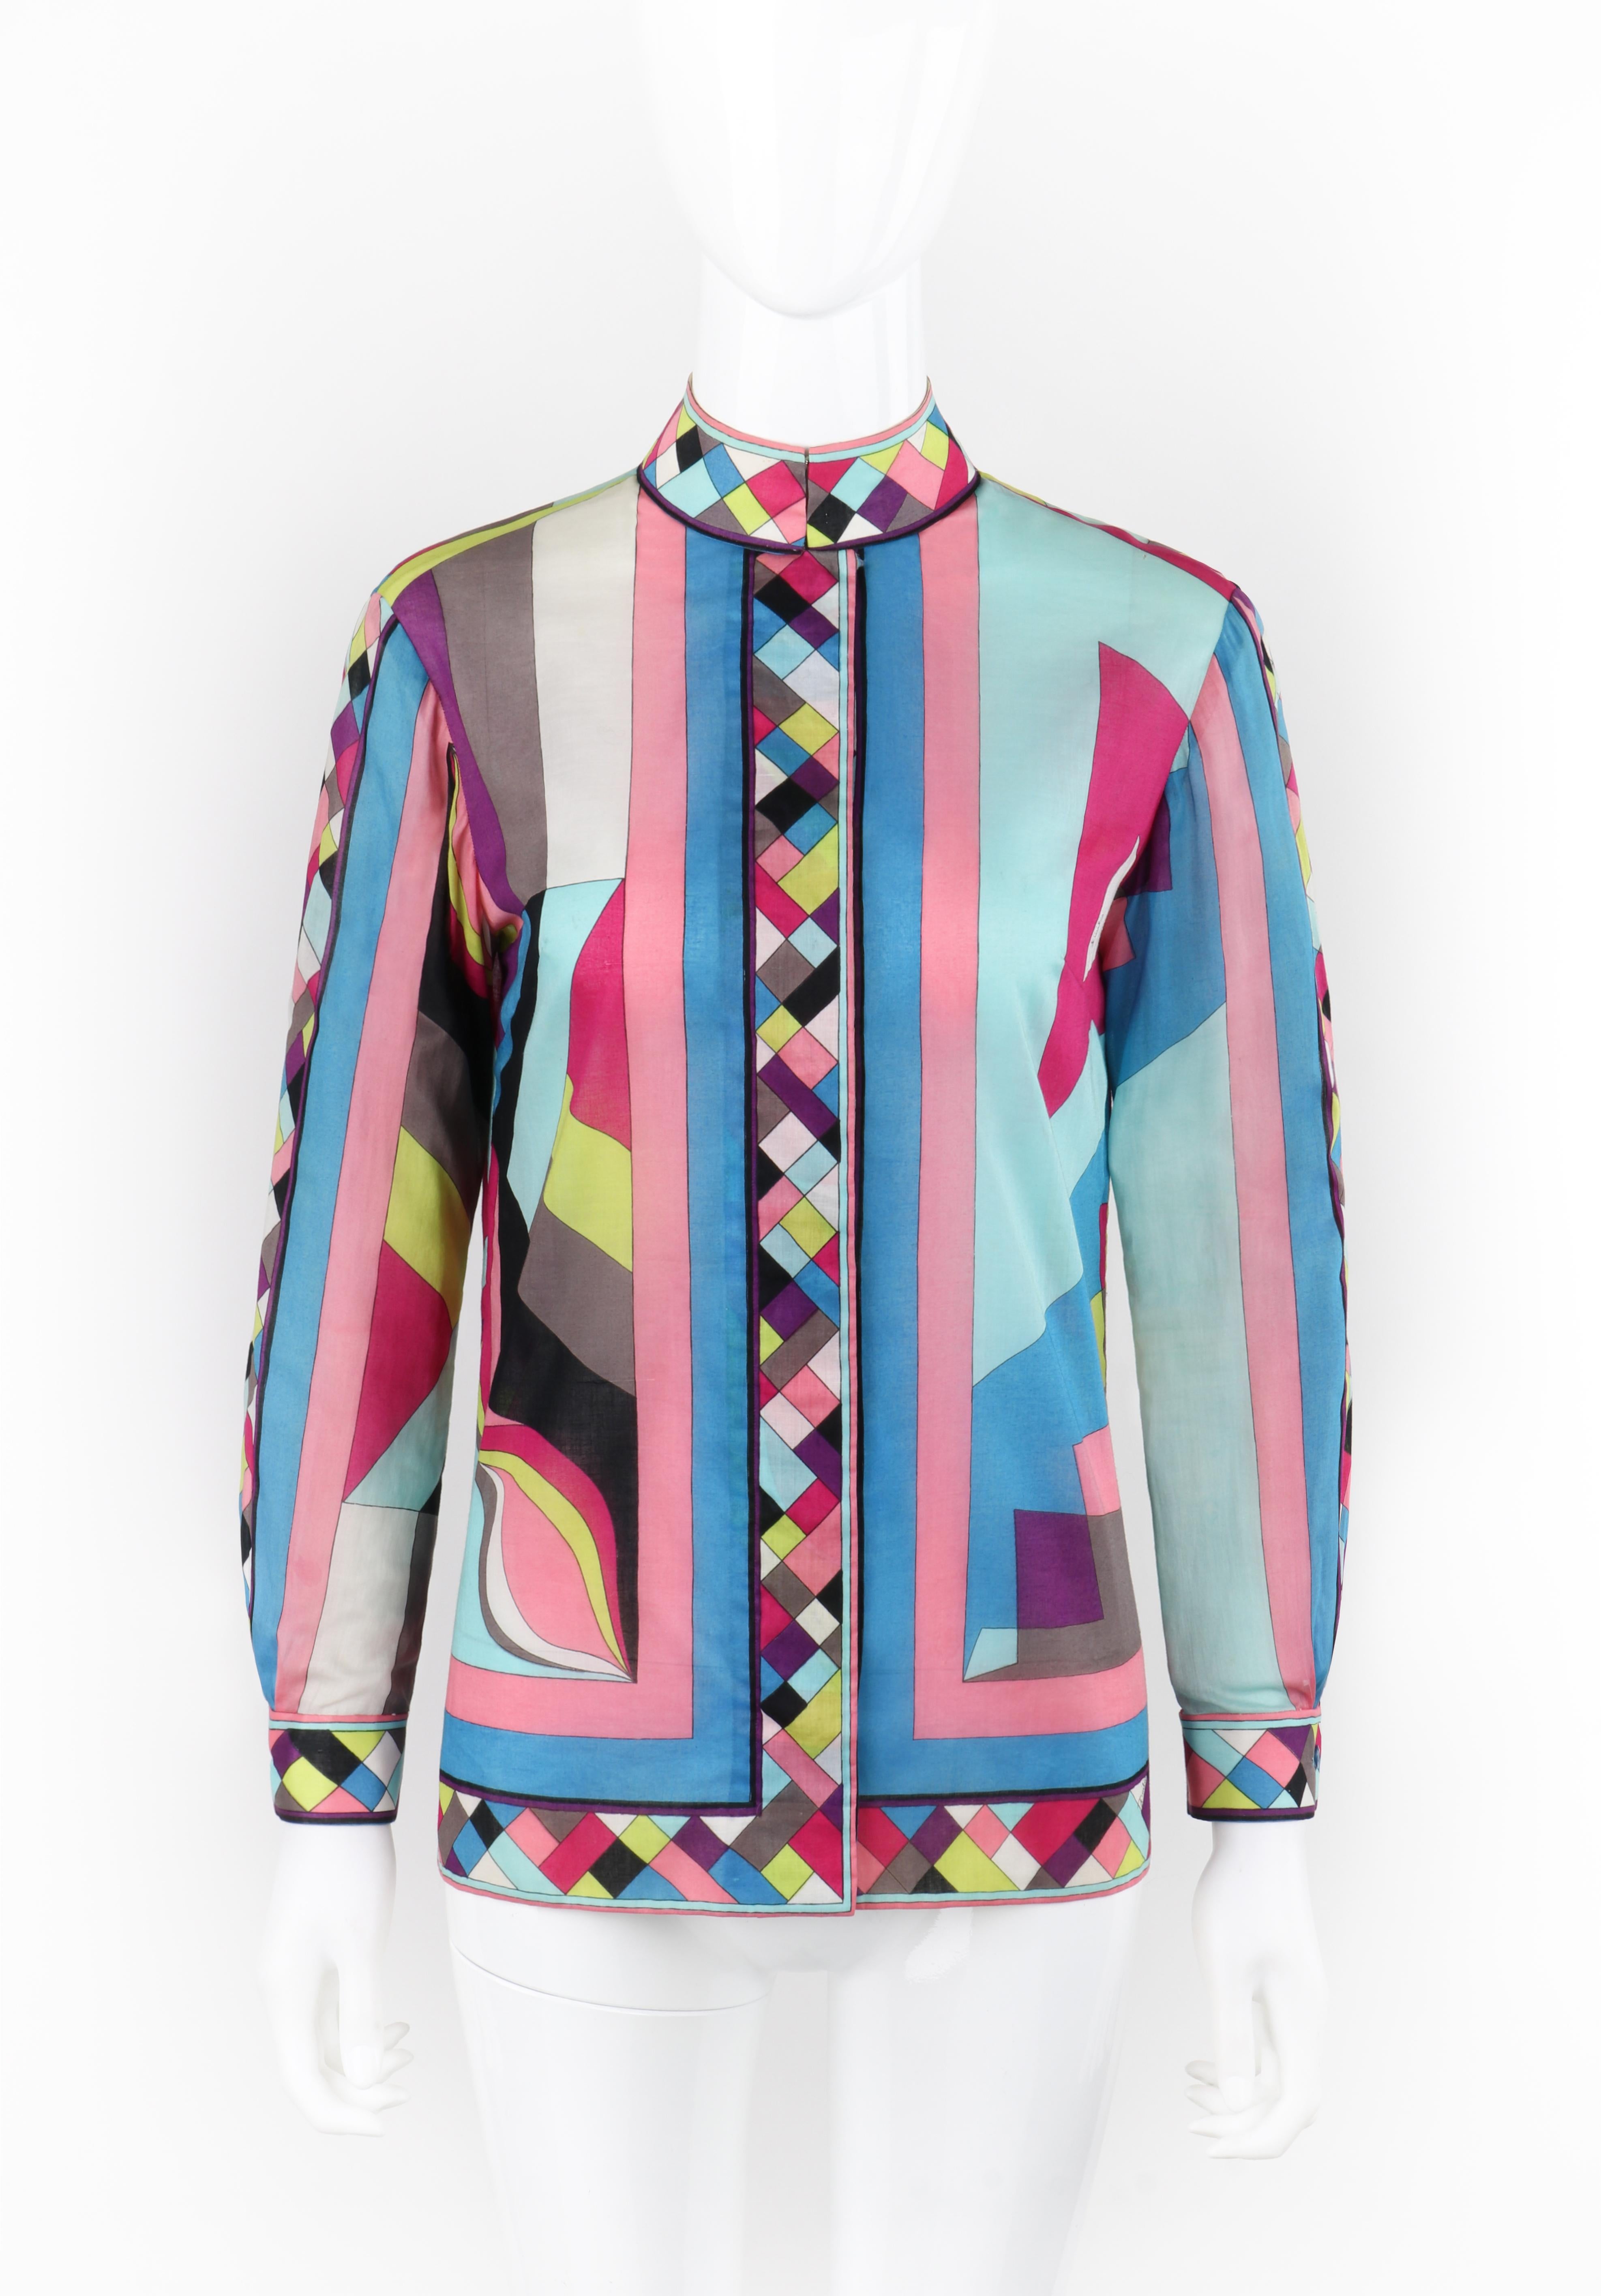 Brand / Manufacturer: Emilio Pucci
Circa: 1969
Designer: Emilio Pucci
Style: Button-Up Top
Color(s): Shades of blue, pink, purple, green, gray, black, white
Lined: No
Marked Fabric Content: 